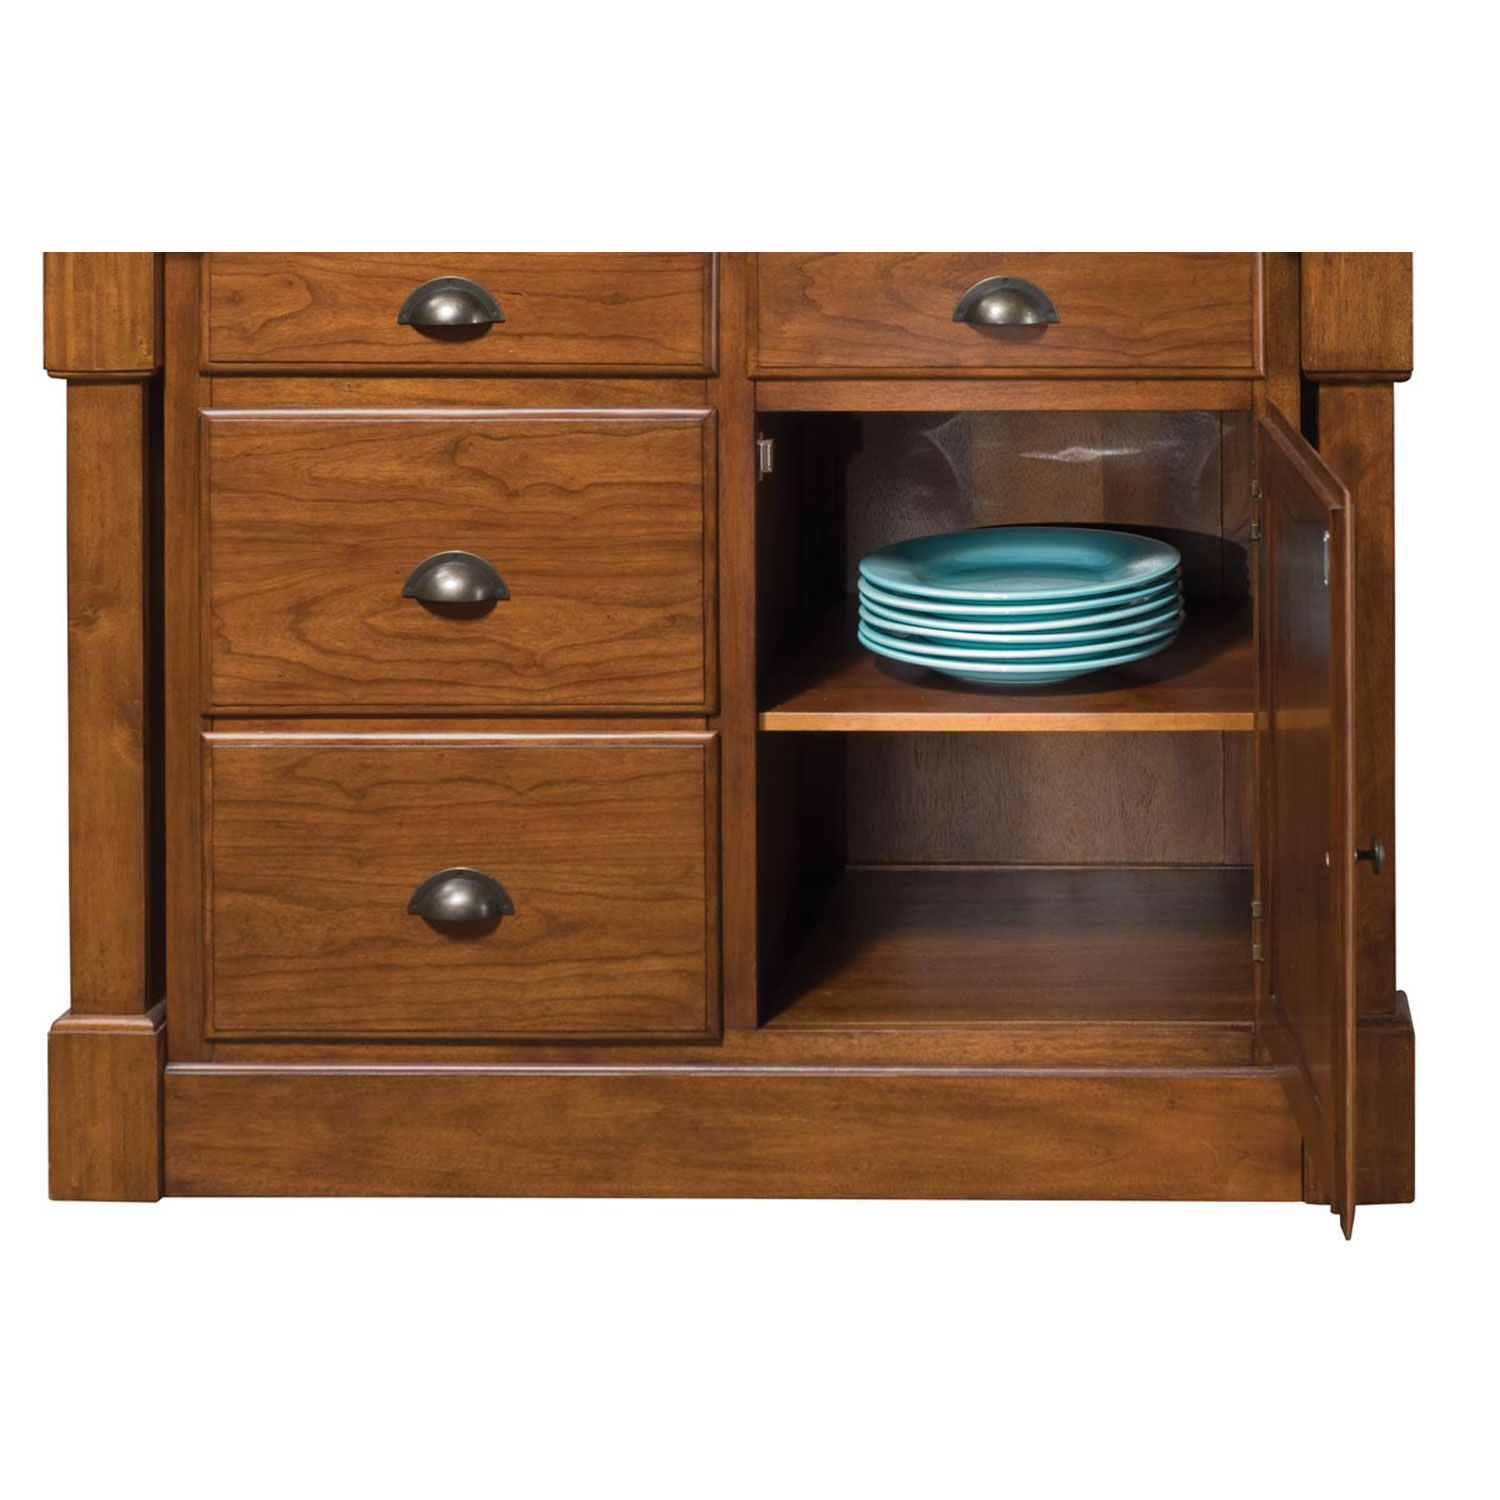 Home Styles Aspen Drawer Chest in Rustic Cherry 